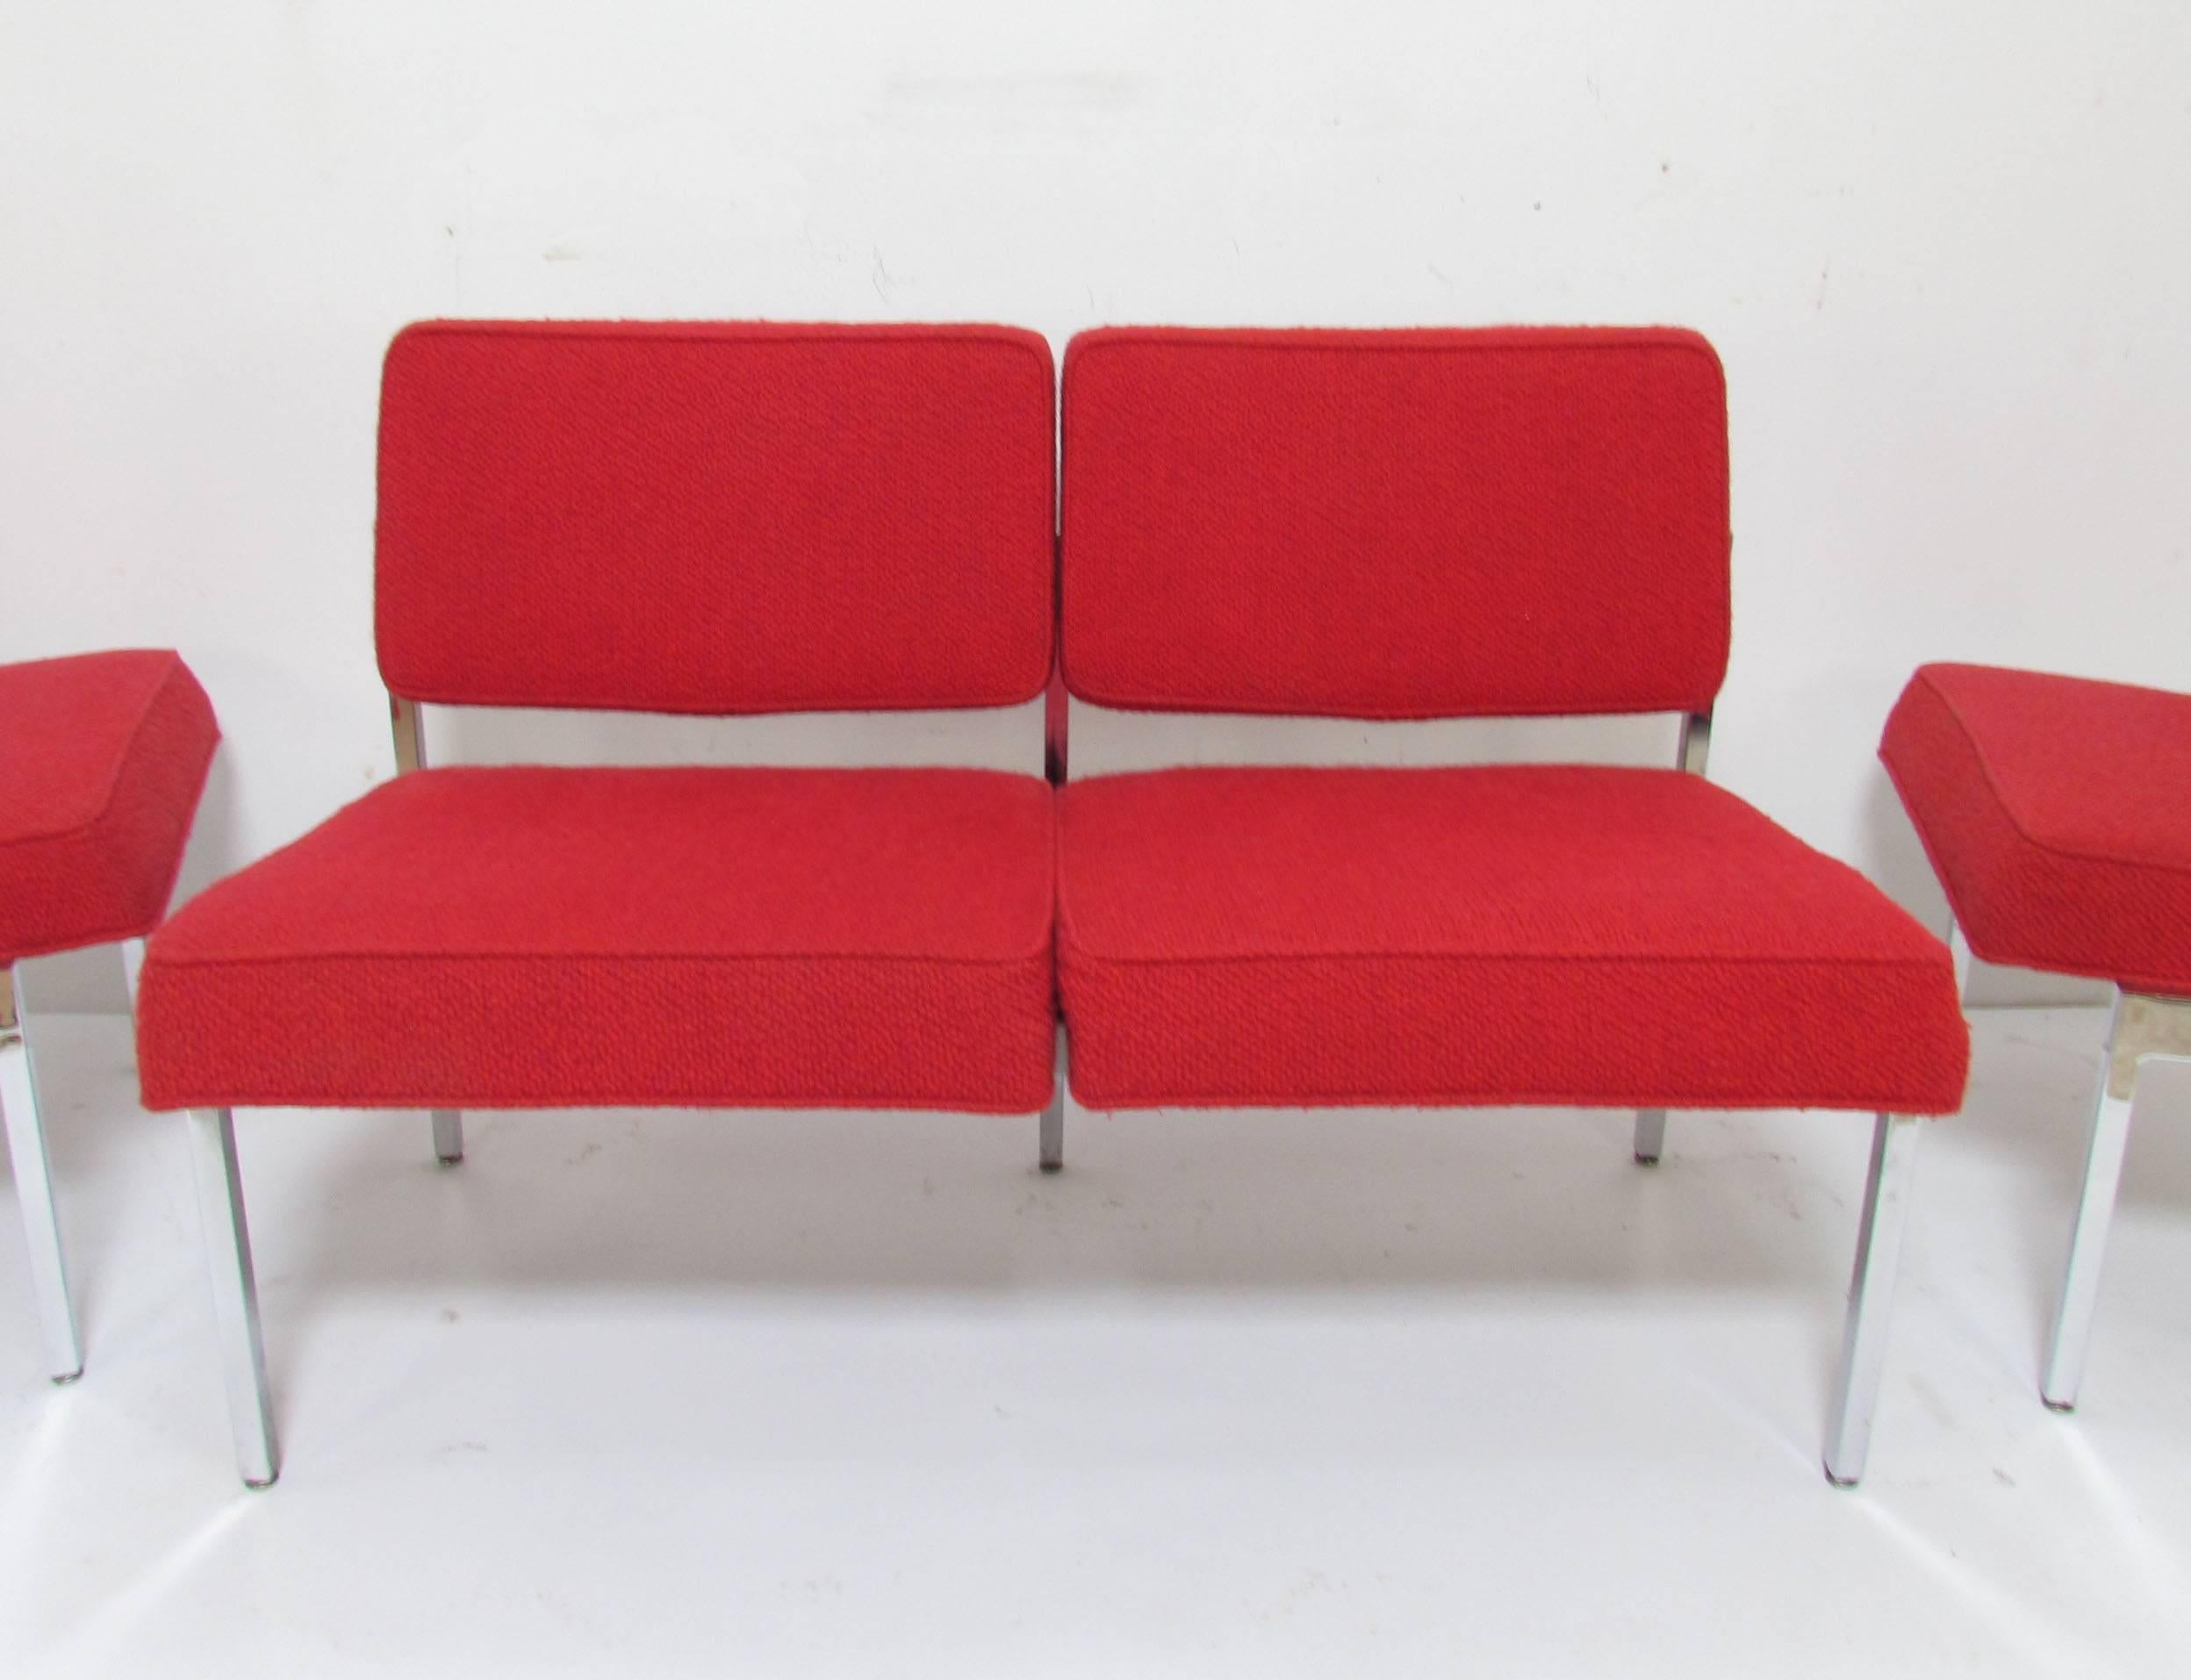 American Steelcase Loveseat and Pair of Lounge Chairs Suite, circa 1960s